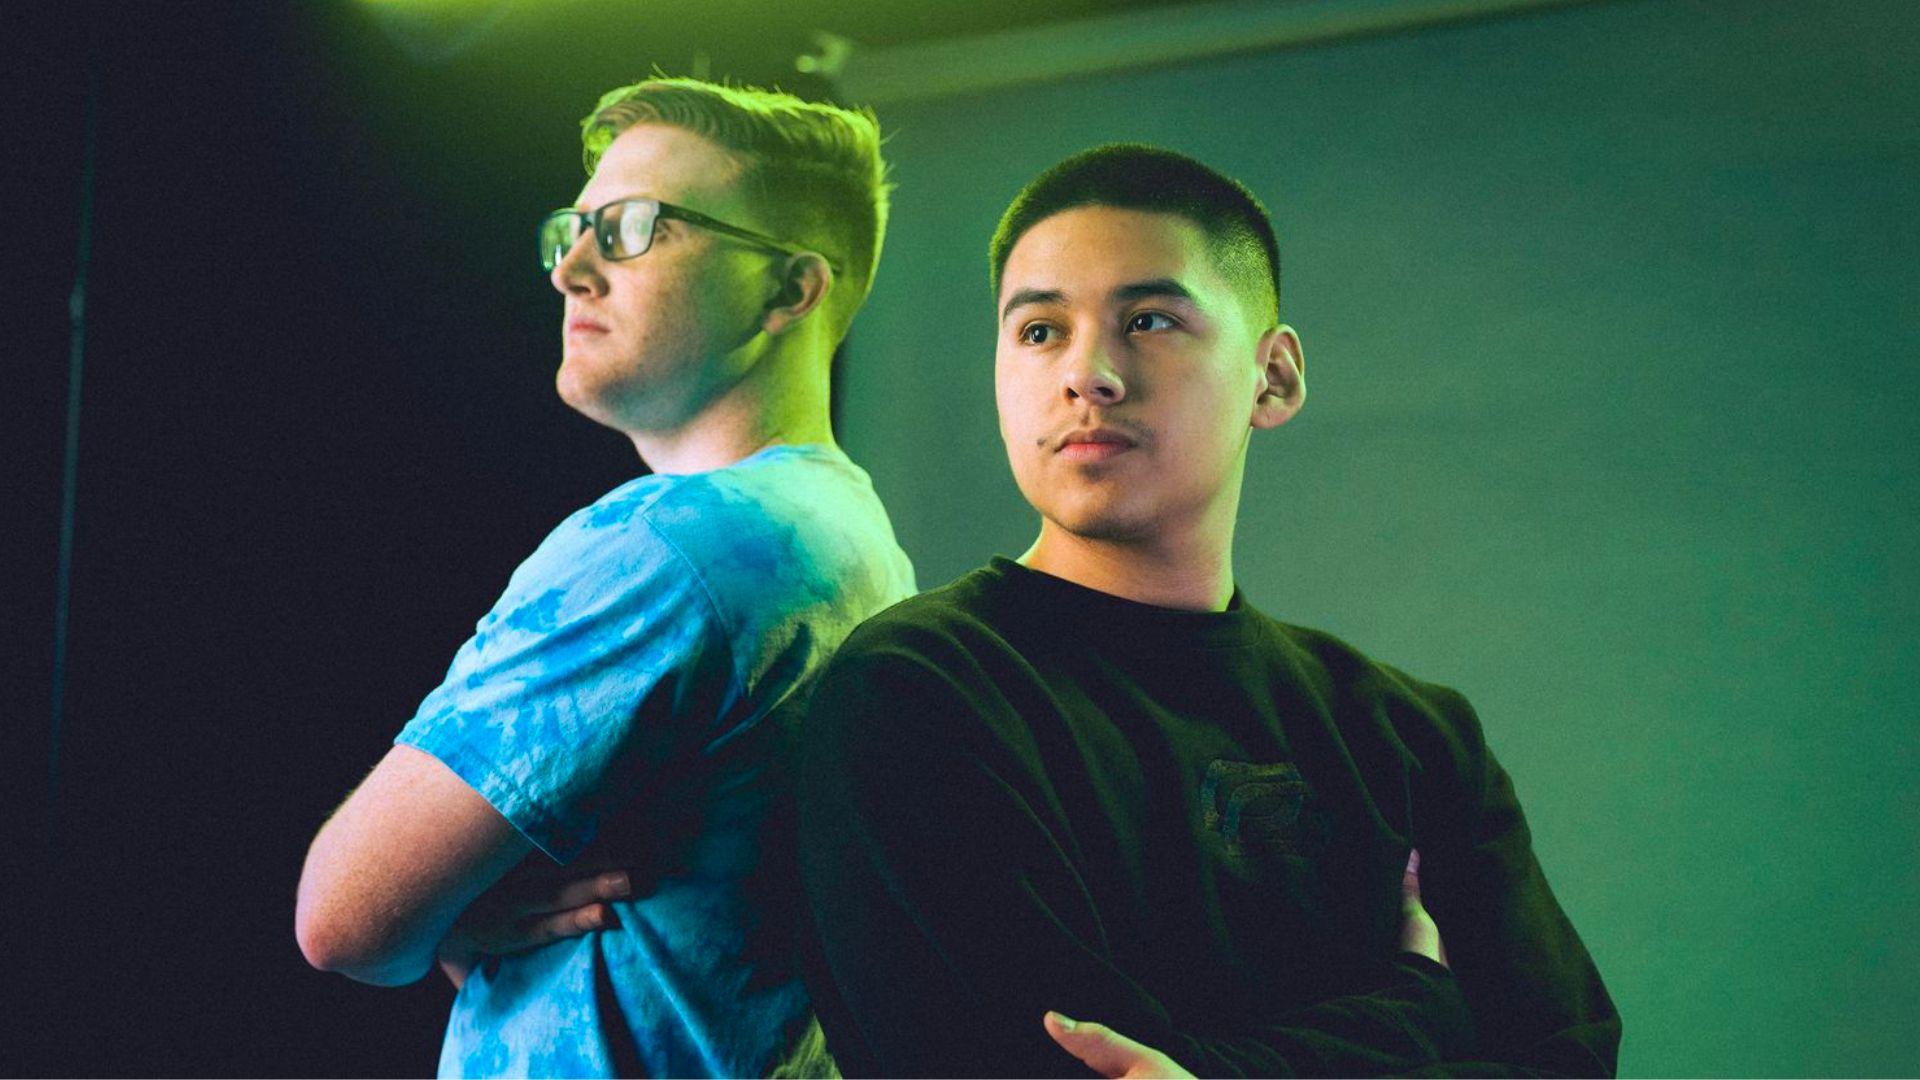 Scump and Shotzzy stood back to back in black and blue shirts